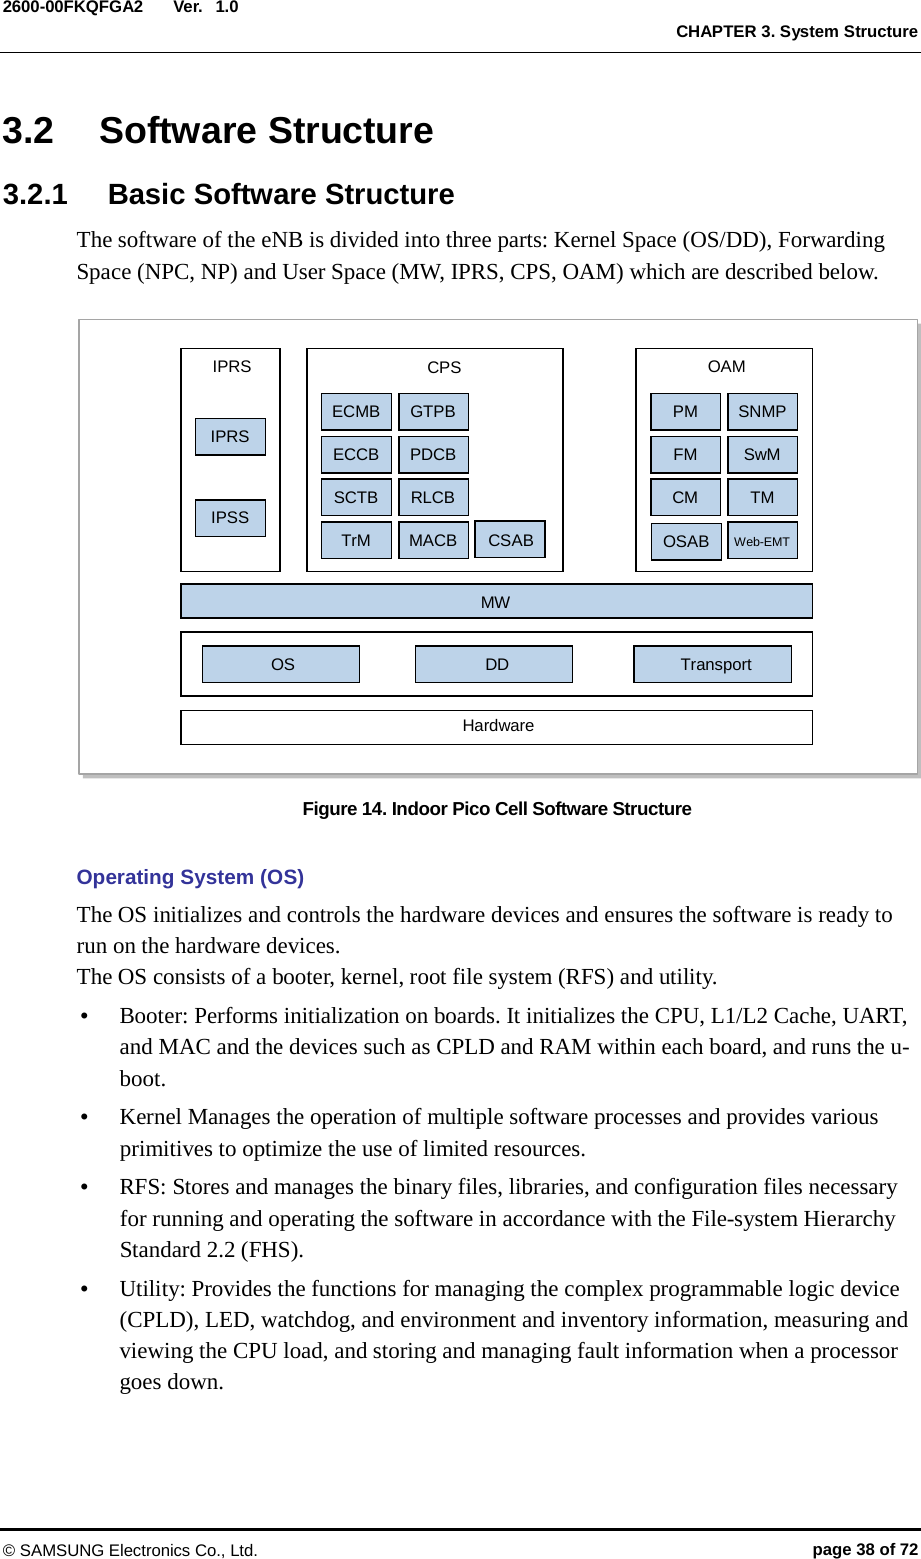  Ver.  CHAPTER 3. System Structure 2600-00FKQFGA2 1.0 3.2 Software Structure 3.2.1 Basic Software Structure   The software of the eNB is divided into three parts: Kernel Space (OS/DD), Forwarding Space (NPC, NP) and User Space (MW, IPRS, CPS, OAM) which are described below.  Figure 14. Indoor Pico Cell Software Structure  Operating System (OS) The OS initializes and controls the hardware devices and ensures the software is ready to run on the hardware devices. The OS consists of a booter, kernel, root file system (RFS) and utility.  Booter: Performs initialization on boards. It initializes the CPU, L1/L2 Cache, UART, and MAC and the devices such as CPLD and RAM within each board, and runs the u-boot.    Kernel Manages the operation of multiple software processes and provides various primitives to optimize the use of limited resources.  RFS: Stores and manages the binary files, libraries, and configuration files necessary for running and operating the software in accordance with the File-system Hierarchy Standard 2.2 (FHS).  Utility: Provides the functions for managing the complex programmable logic device (CPLD), LED, watchdog, and environment and inventory information, measuring and viewing the CPU load, and storing and managing fault information when a processor goes down.  IPRS IPRS IPSS CPS ECMB ECCB SCTB TrM GTPB PDCB RLCB MACB OAM PM FM CM SNMP SwM TM Web-EMT MW Transport OS DD Hardware OSAB CSAB © SAMSUNG Electronics Co., Ltd. page 38 of 72 